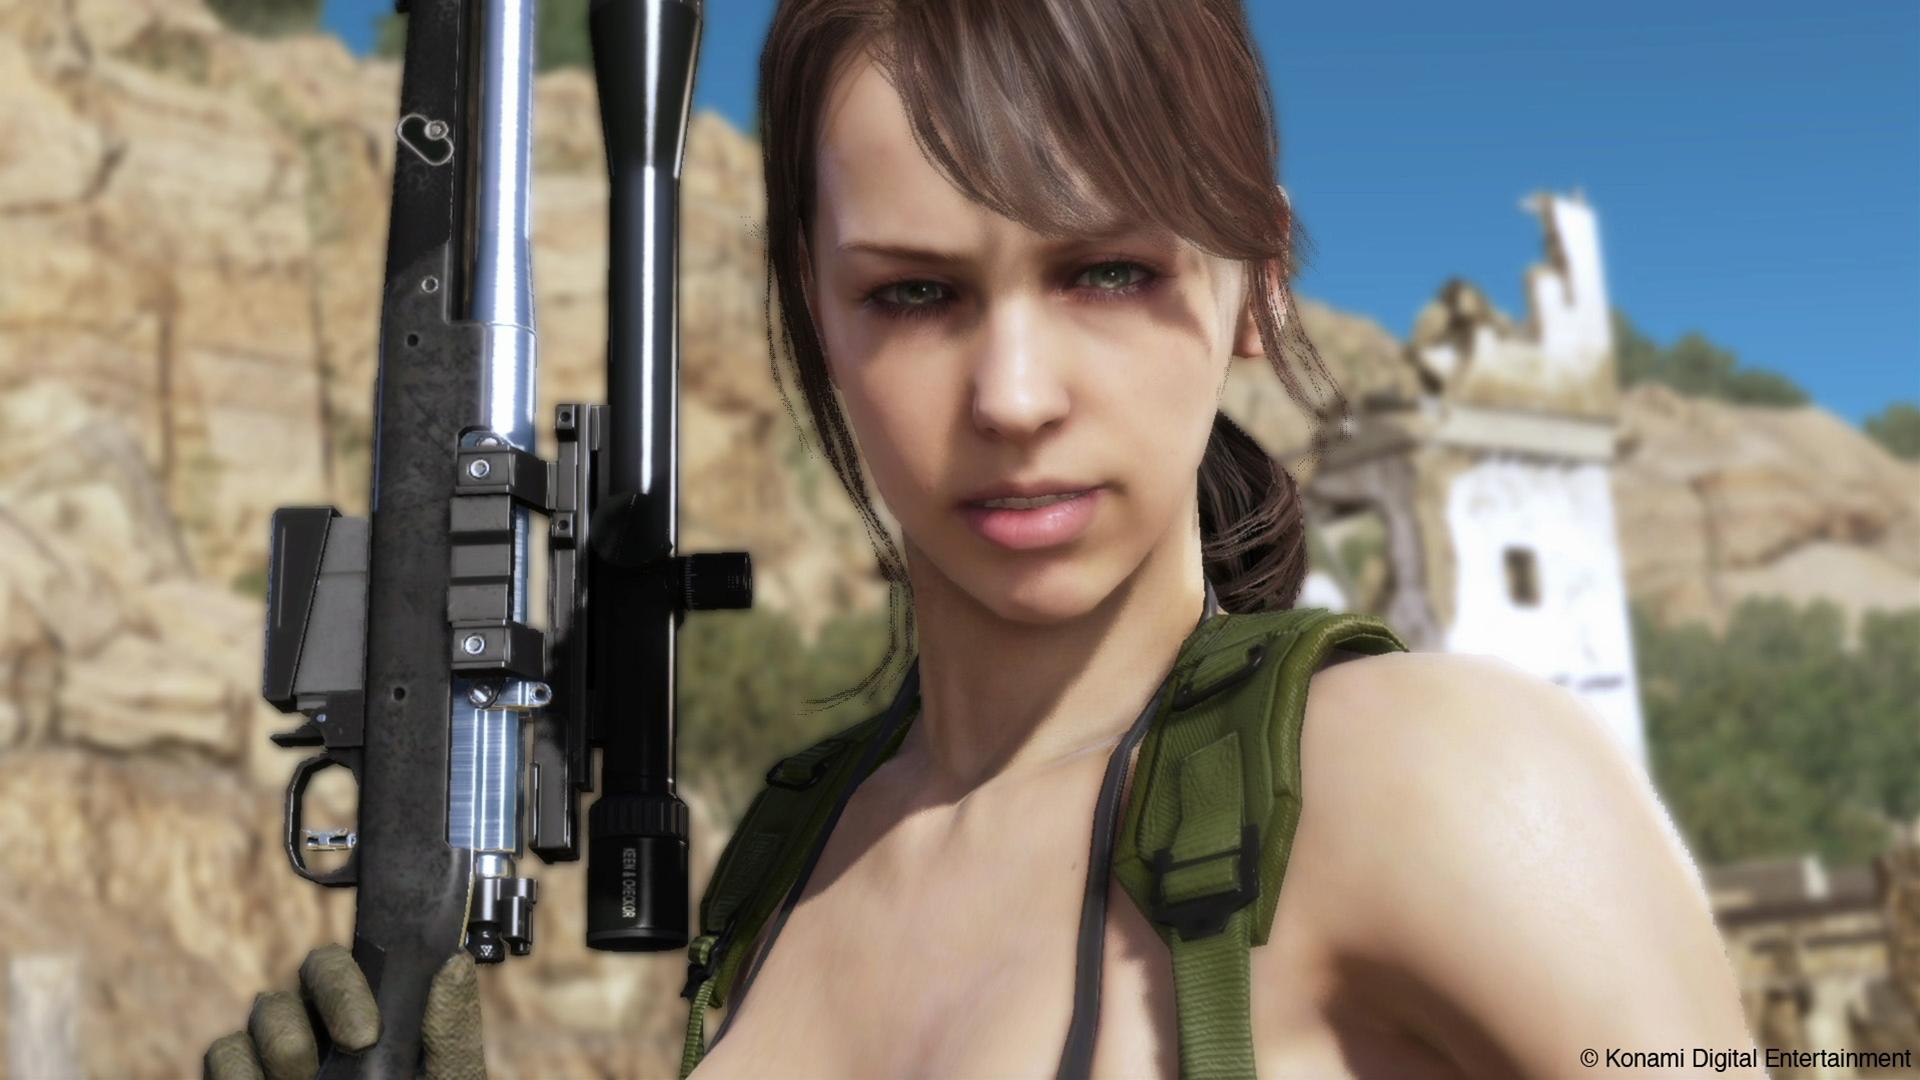 Image for Death Stranding: Kojima will take a "different approach" to overly sexualised characters